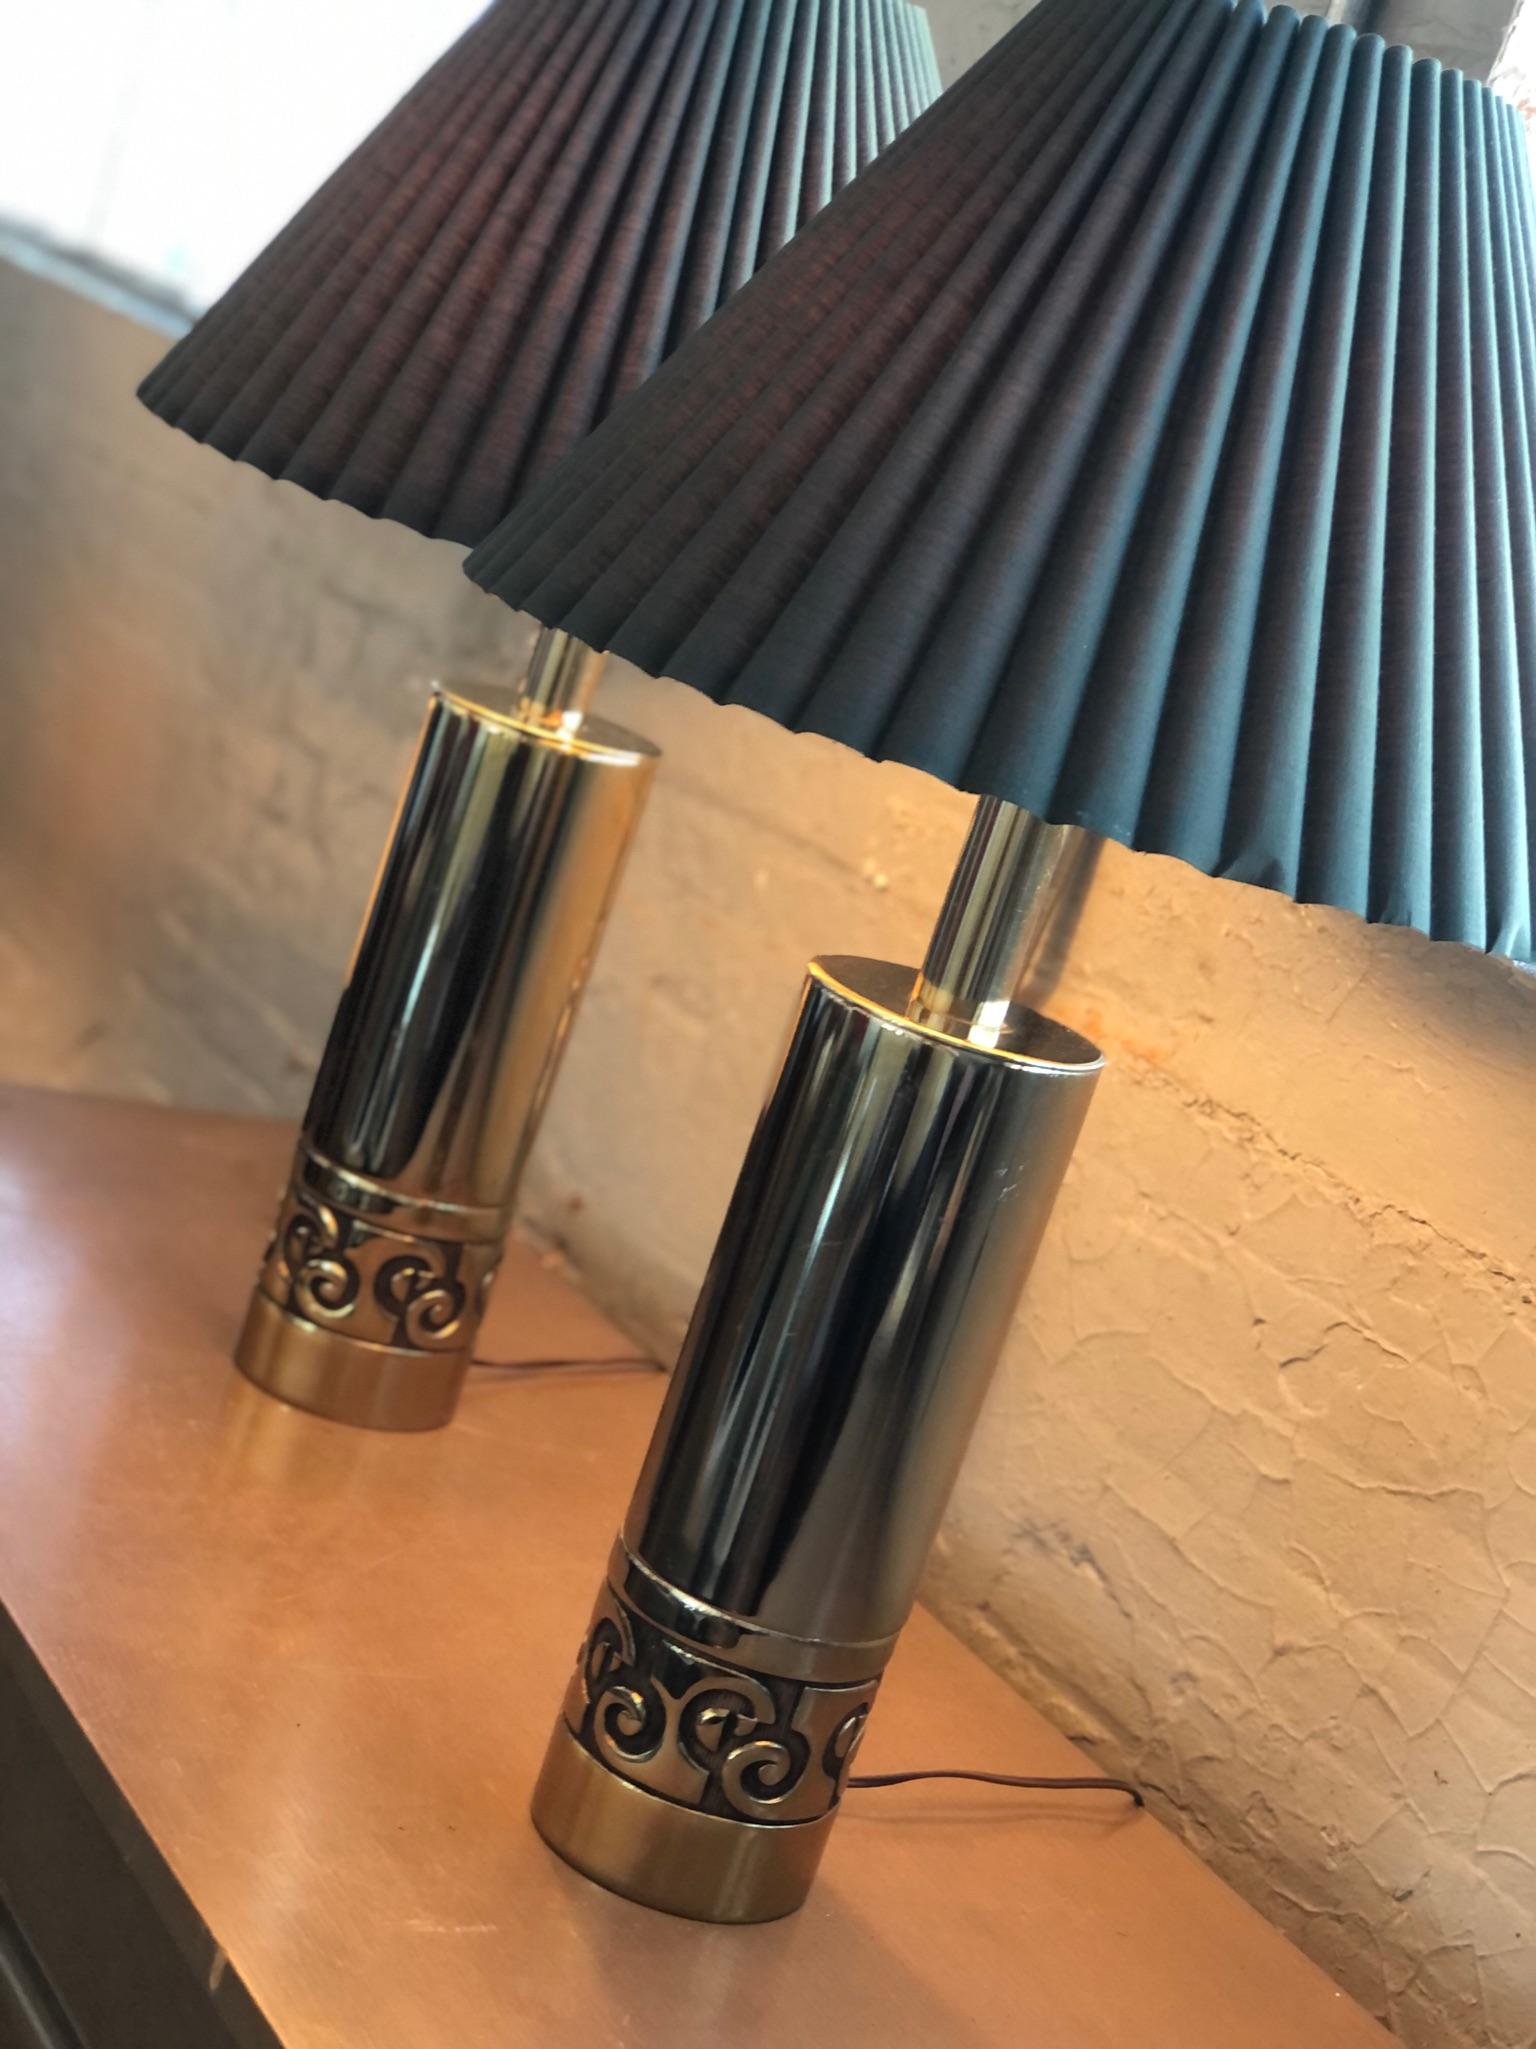 An amazing pair of  vintage Pierre Cardin cylinder brass lamps with a banded relief pattern at the base that nods to the signature PC logo.  

The vintage shades feature a cut box pleats in a deep evergreen hue that compliments the contemporary lamp